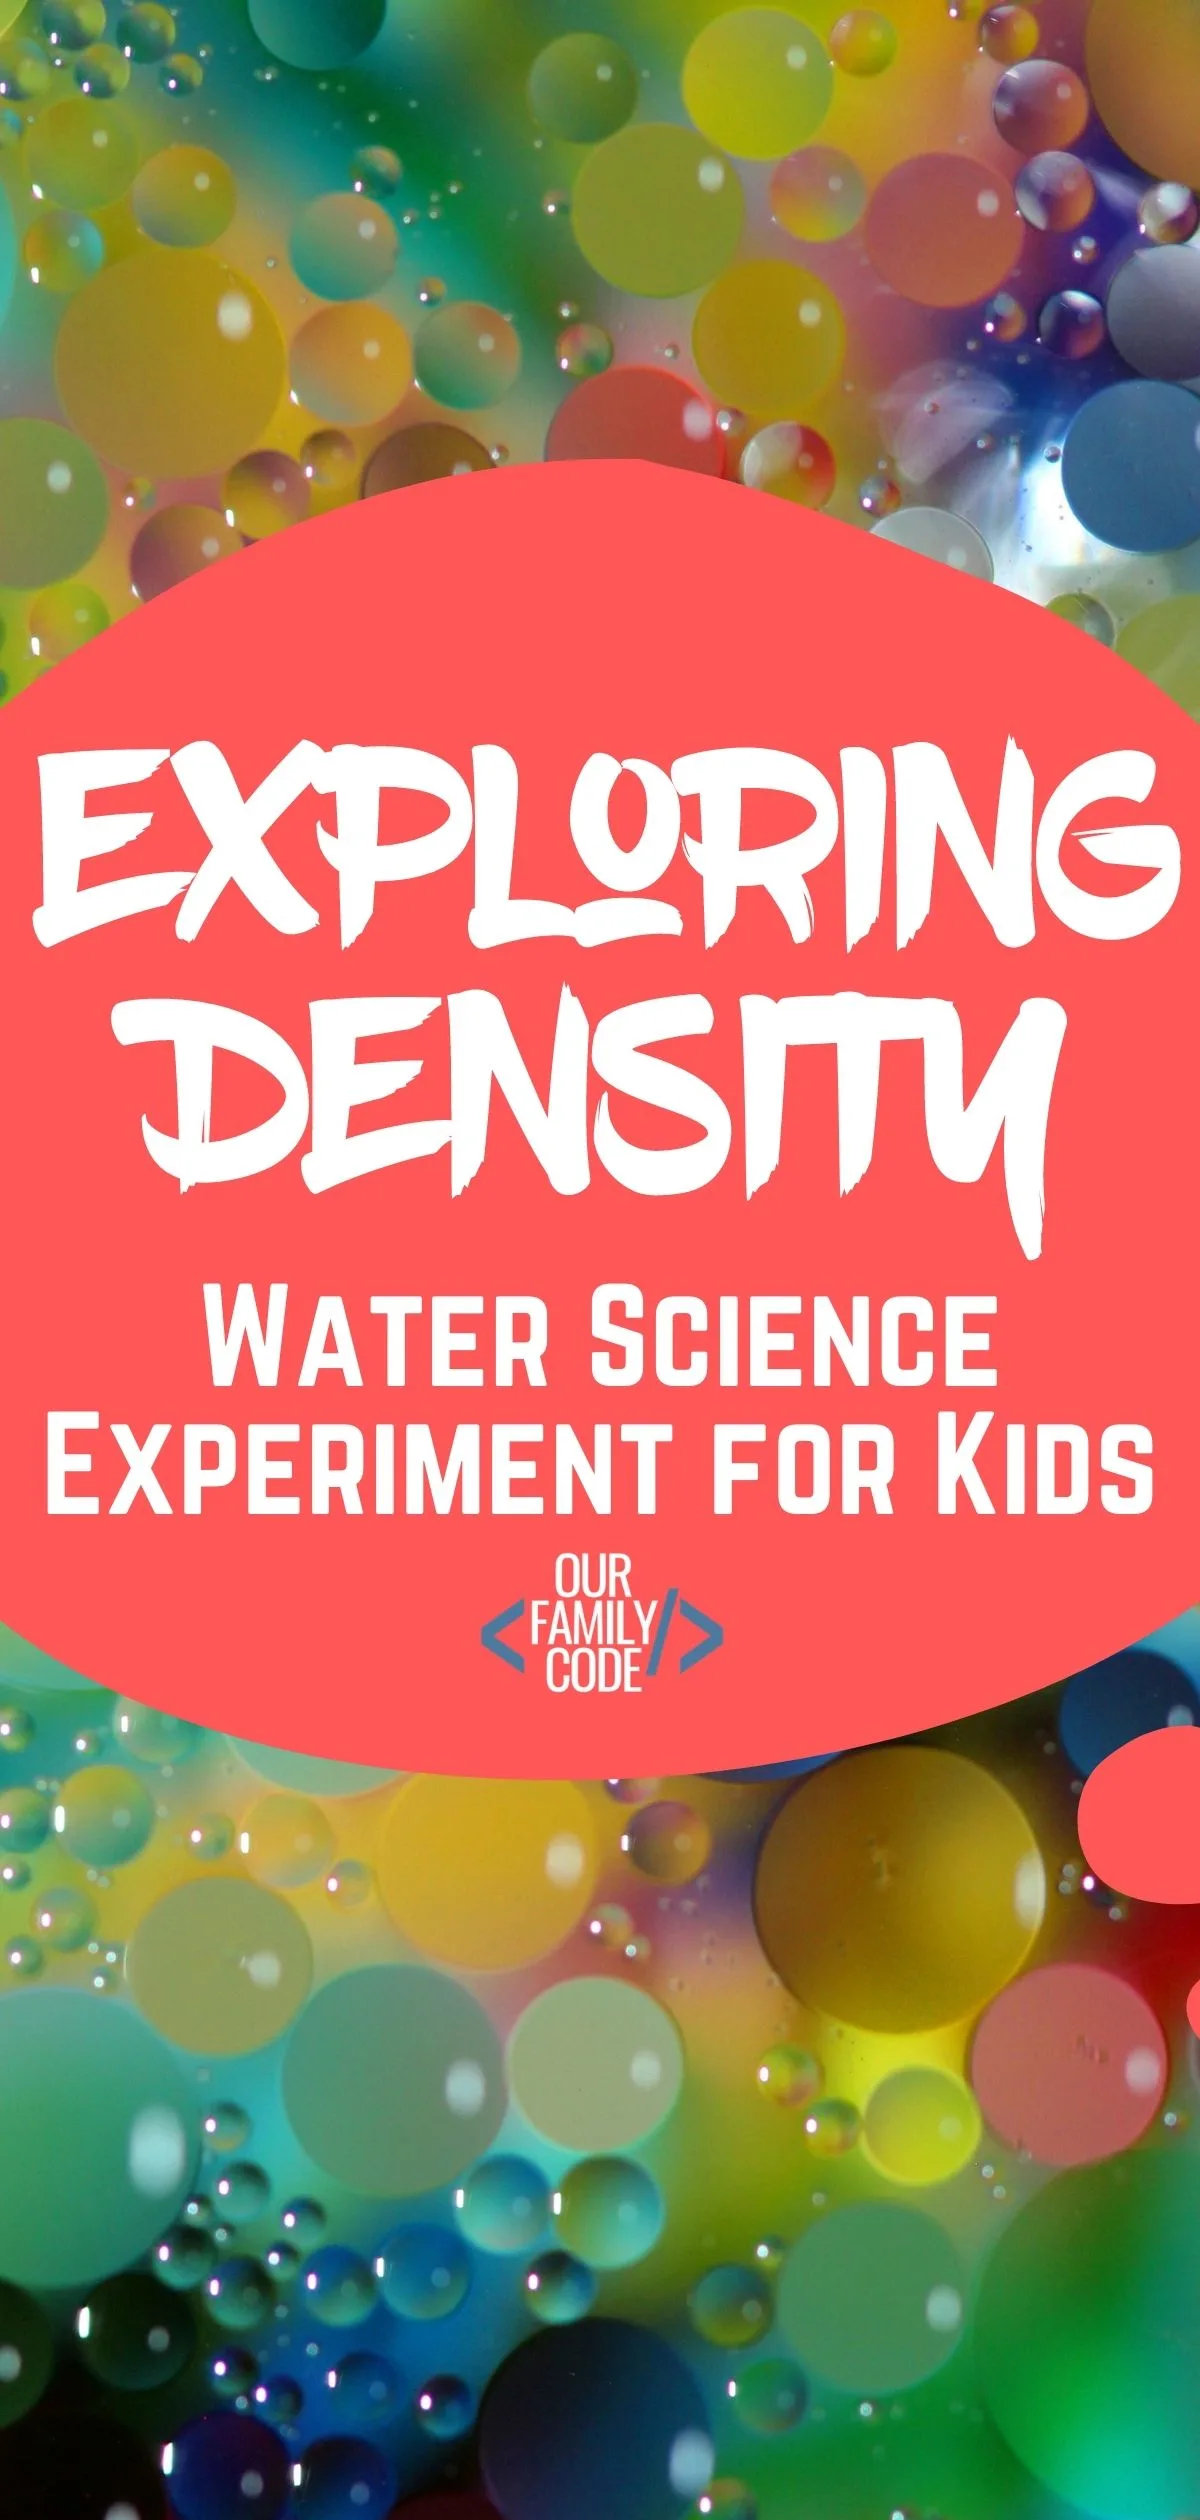 These easy activities will help you teach your kiddos all about DENSITY and challenge them to think scientifically about the liquids and solids they are putting in their sensory bottles as well as open the door for a million more sensory bottle possibilities! #sensorybottles #sensorybottlescience #densityexperiment #kidscienceexperiments #STEAMactivities #STEMactivities #STEAM #STEM #scienceactivitiesforkids